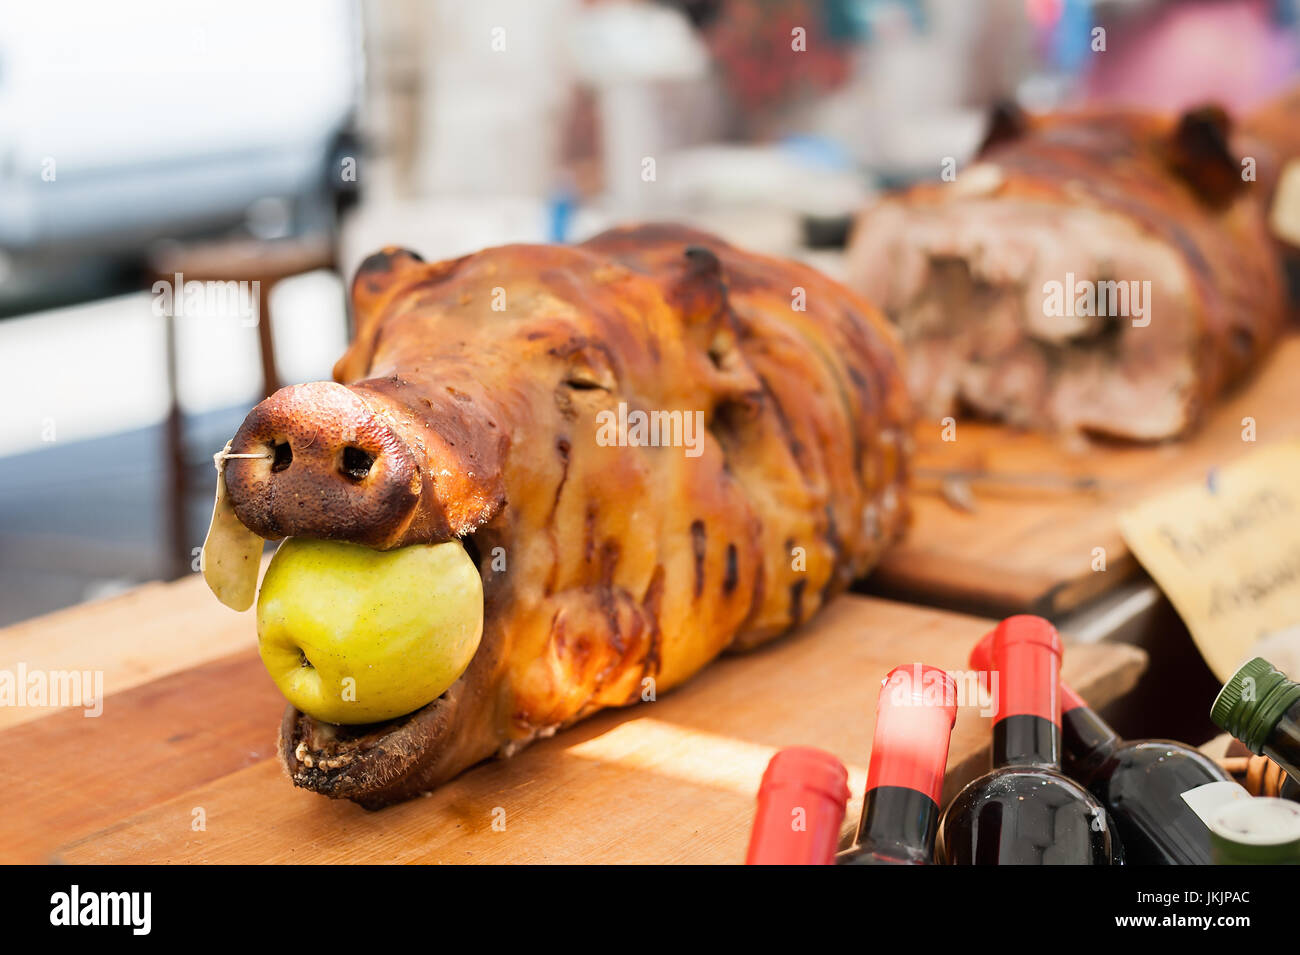 Das ist der Anfang vom Ende - Pagina 15 Pork-roasted-with-apple-in-the-mouth-typical-porchetta-italiana-exposure-JKJPAC